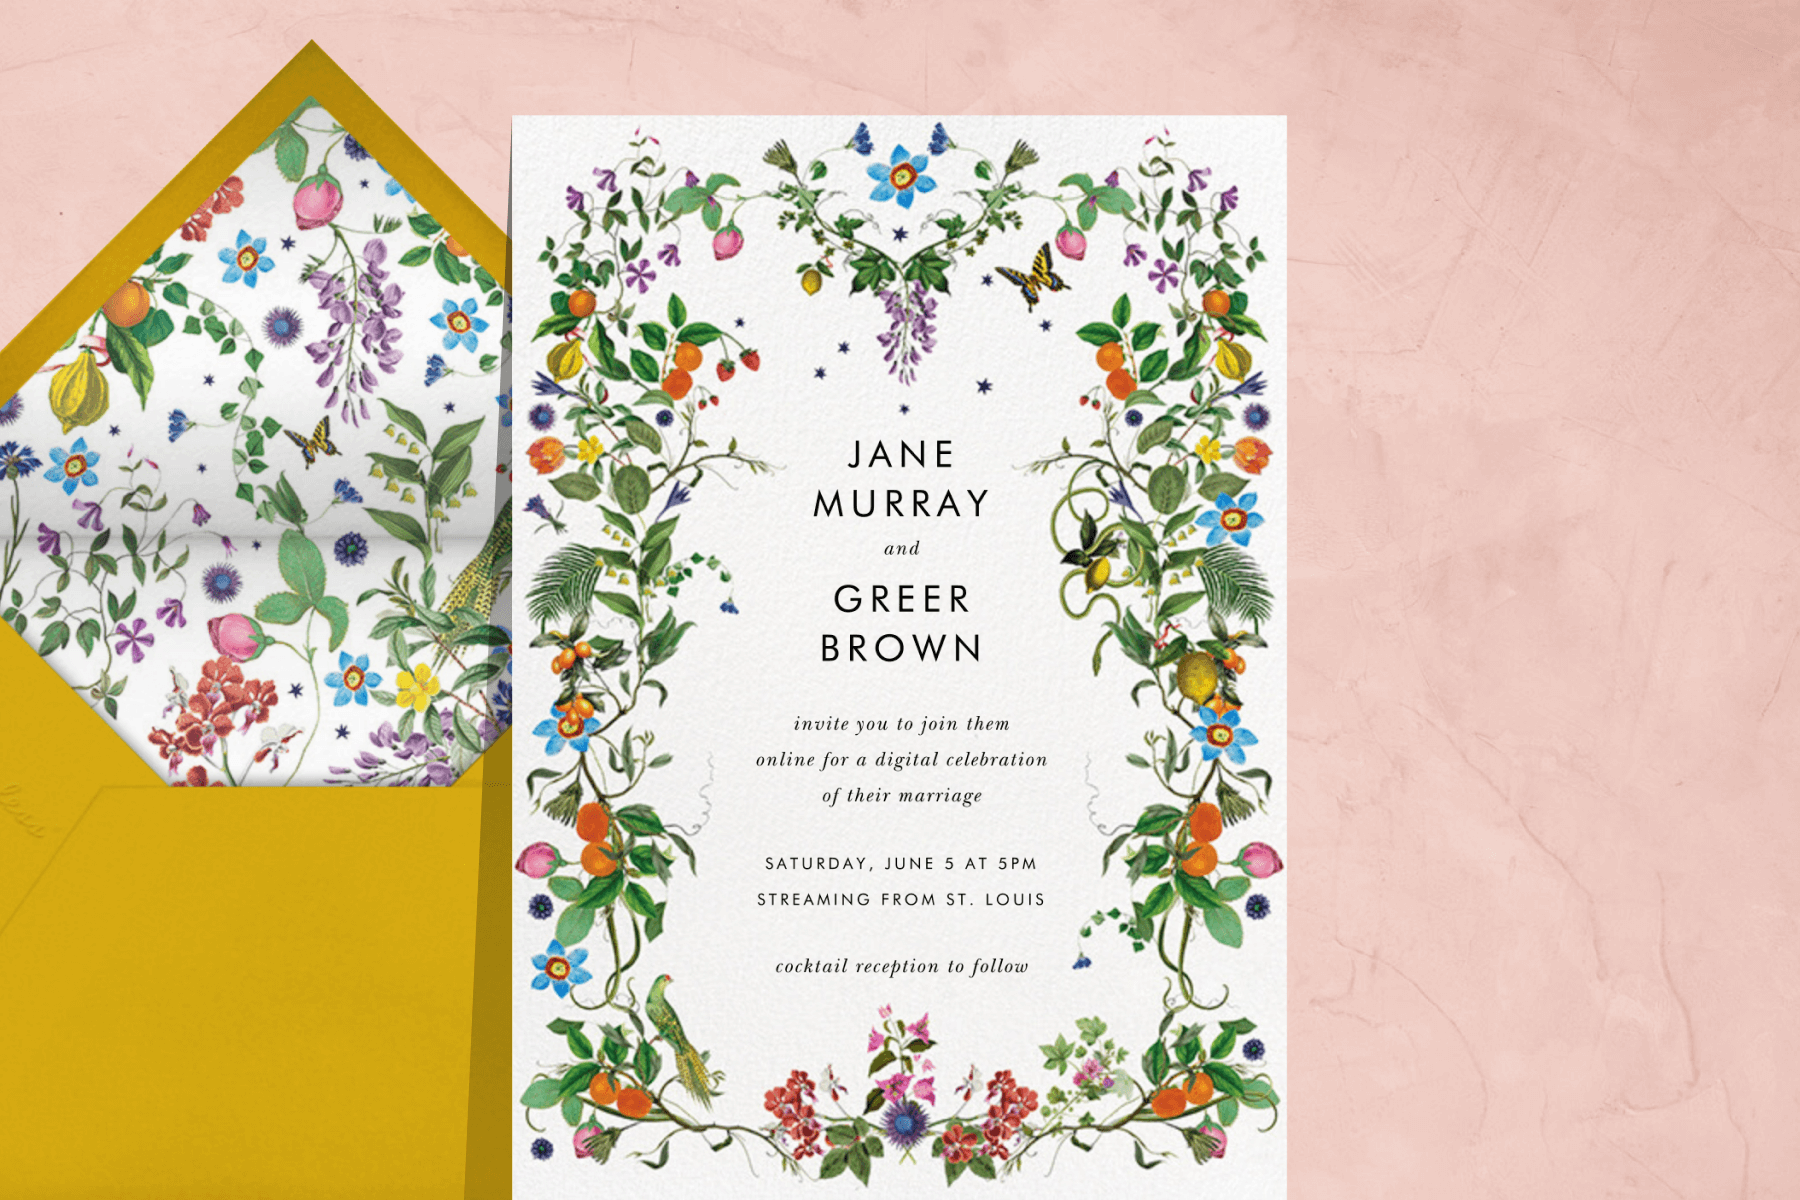 wedding invitation with delicate yet ornate colorful flowers, fruit, and butterflies around the border